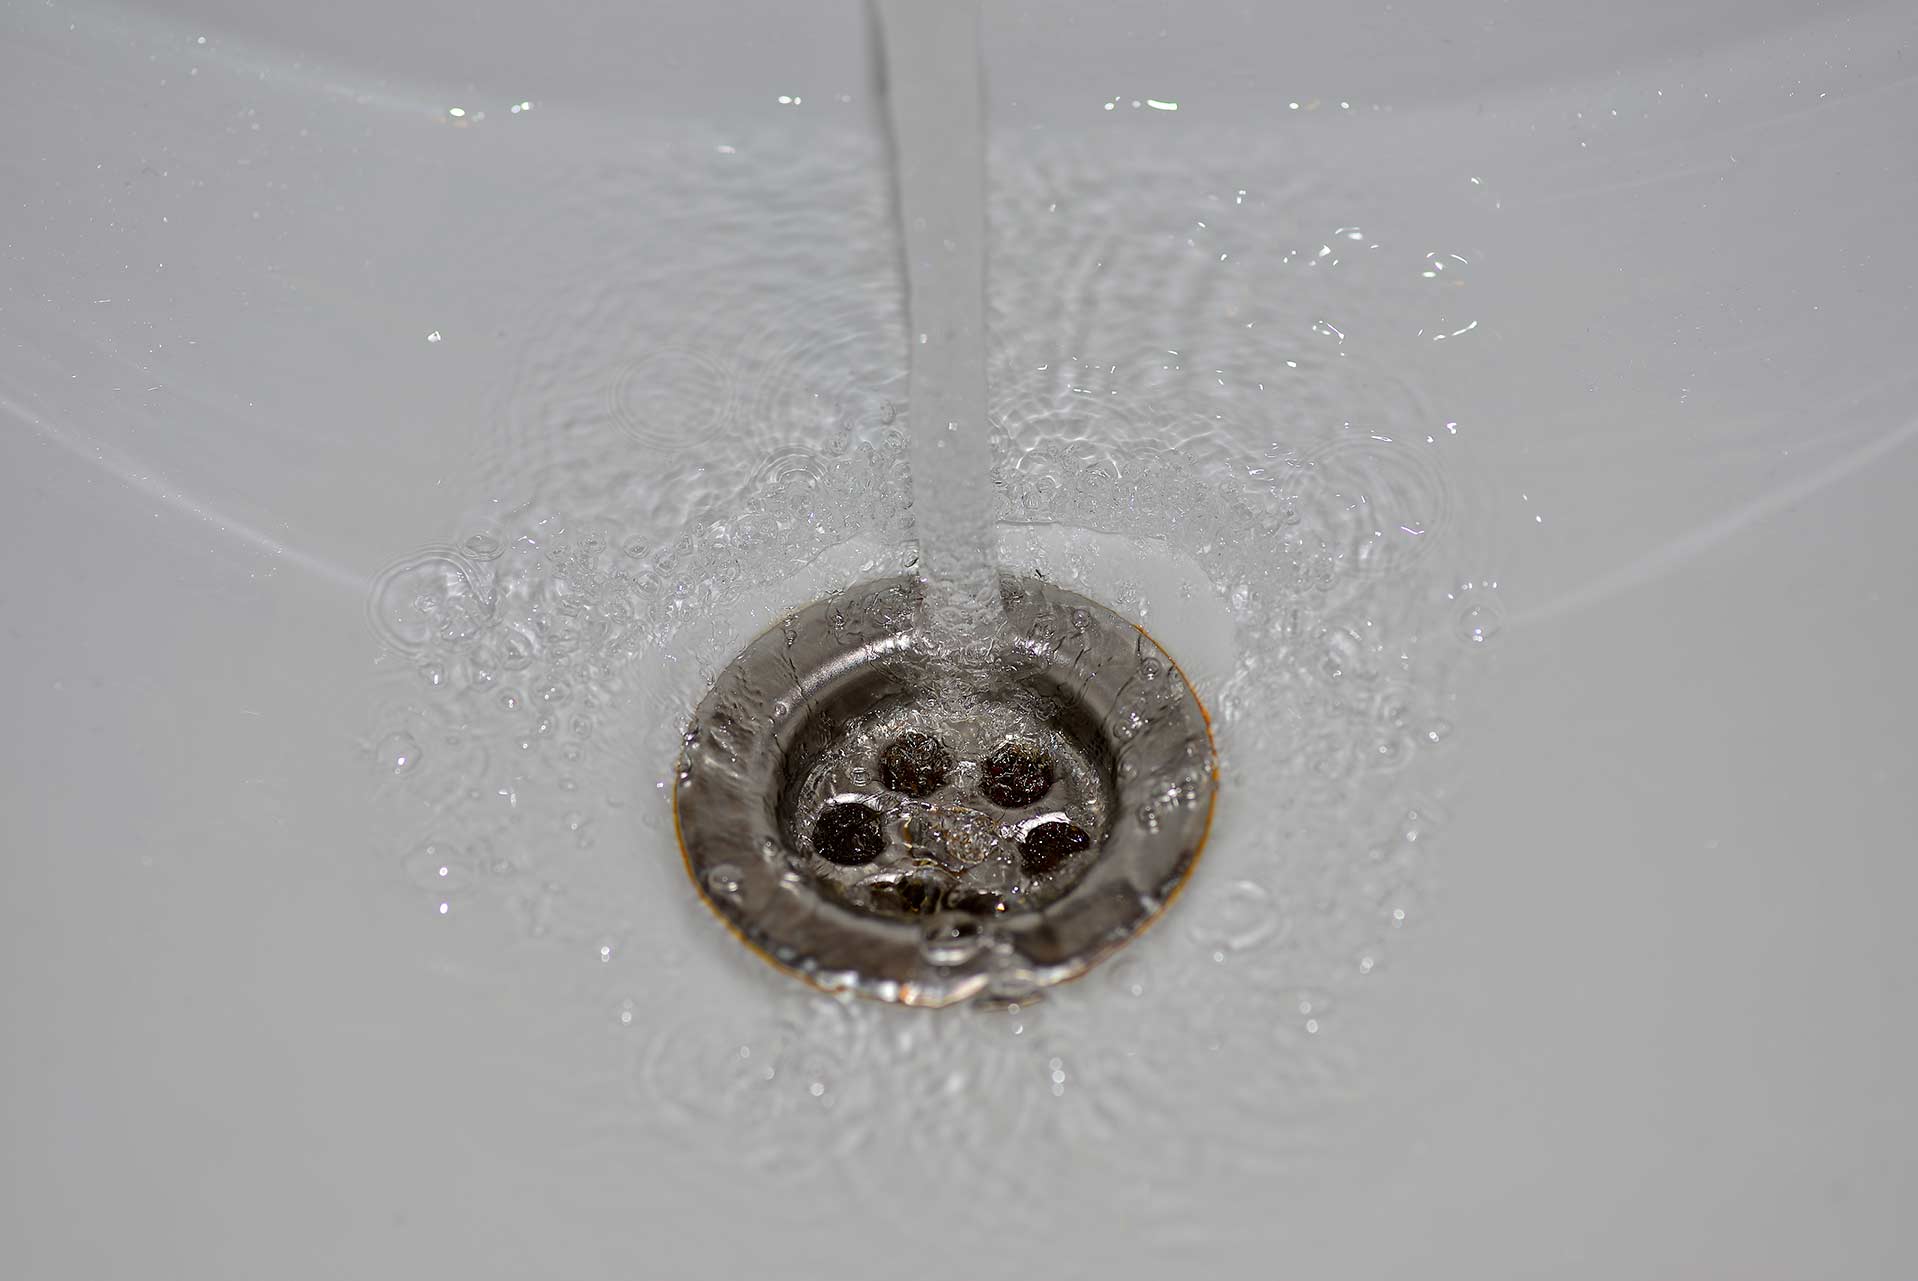 A2B Drains provides services to unblock blocked sinks and drains for properties in Minehead.